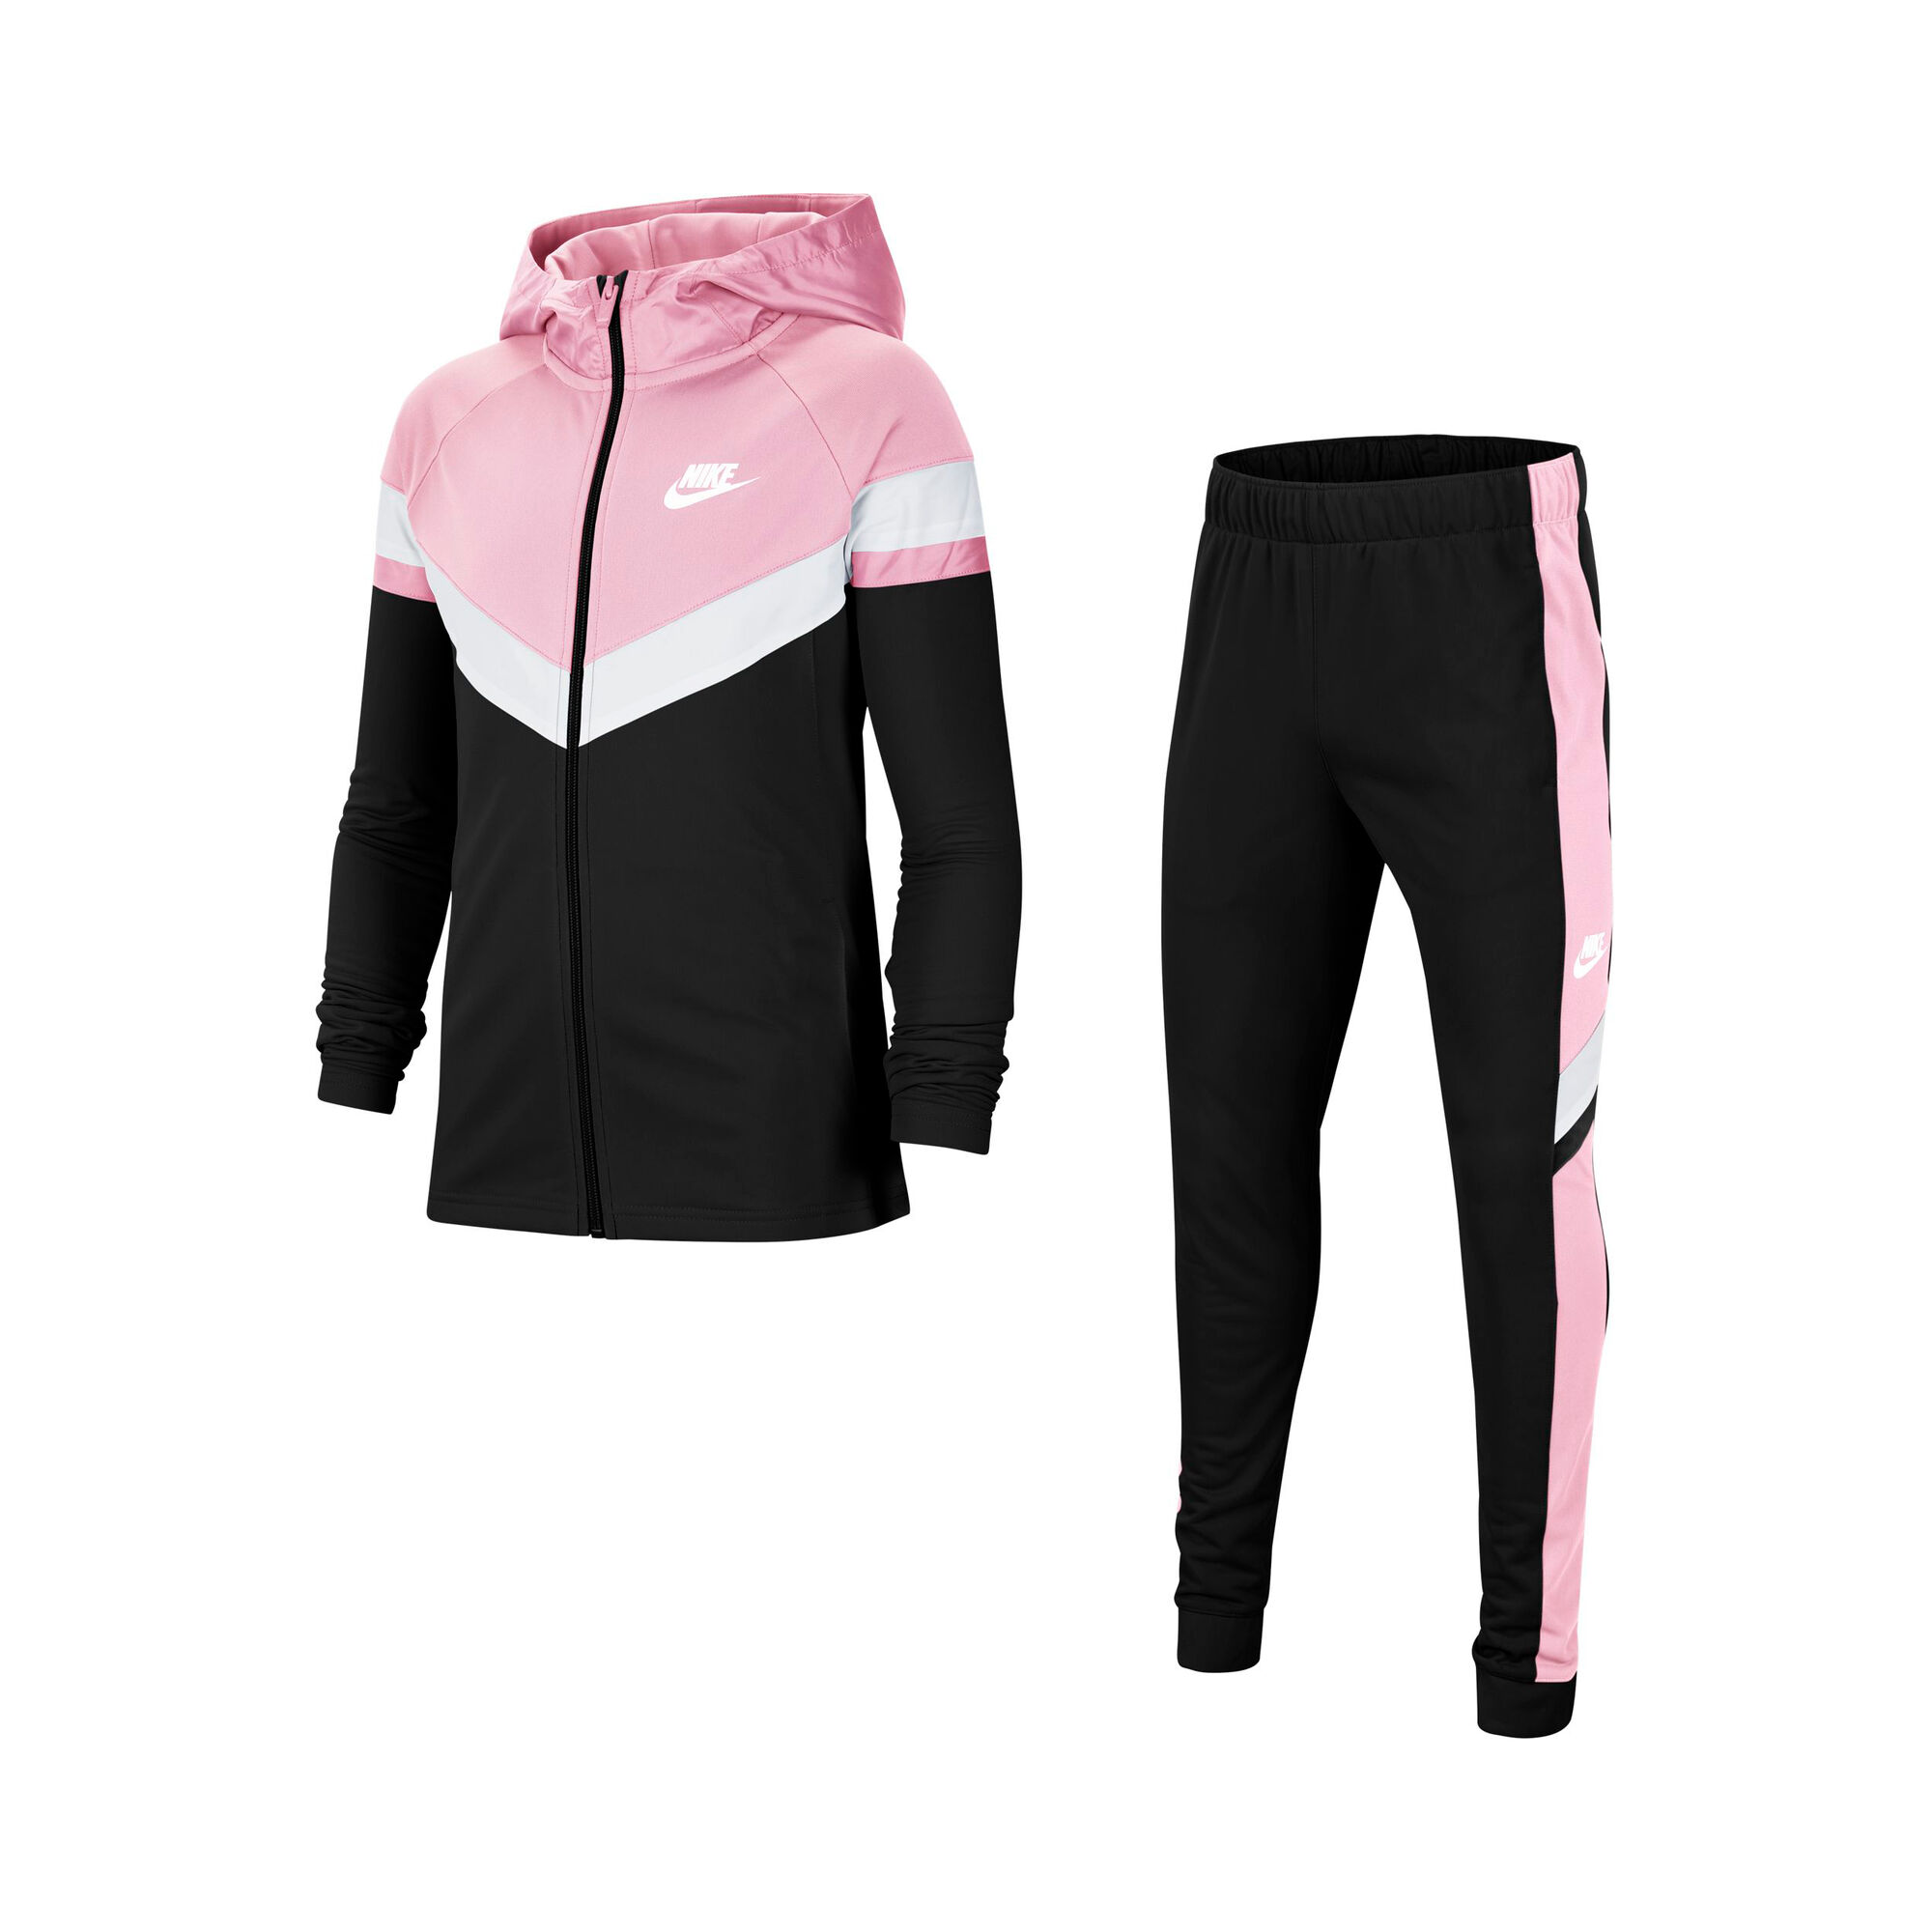 Survêtement fille Nike - Nike - Marques - Lifestyle